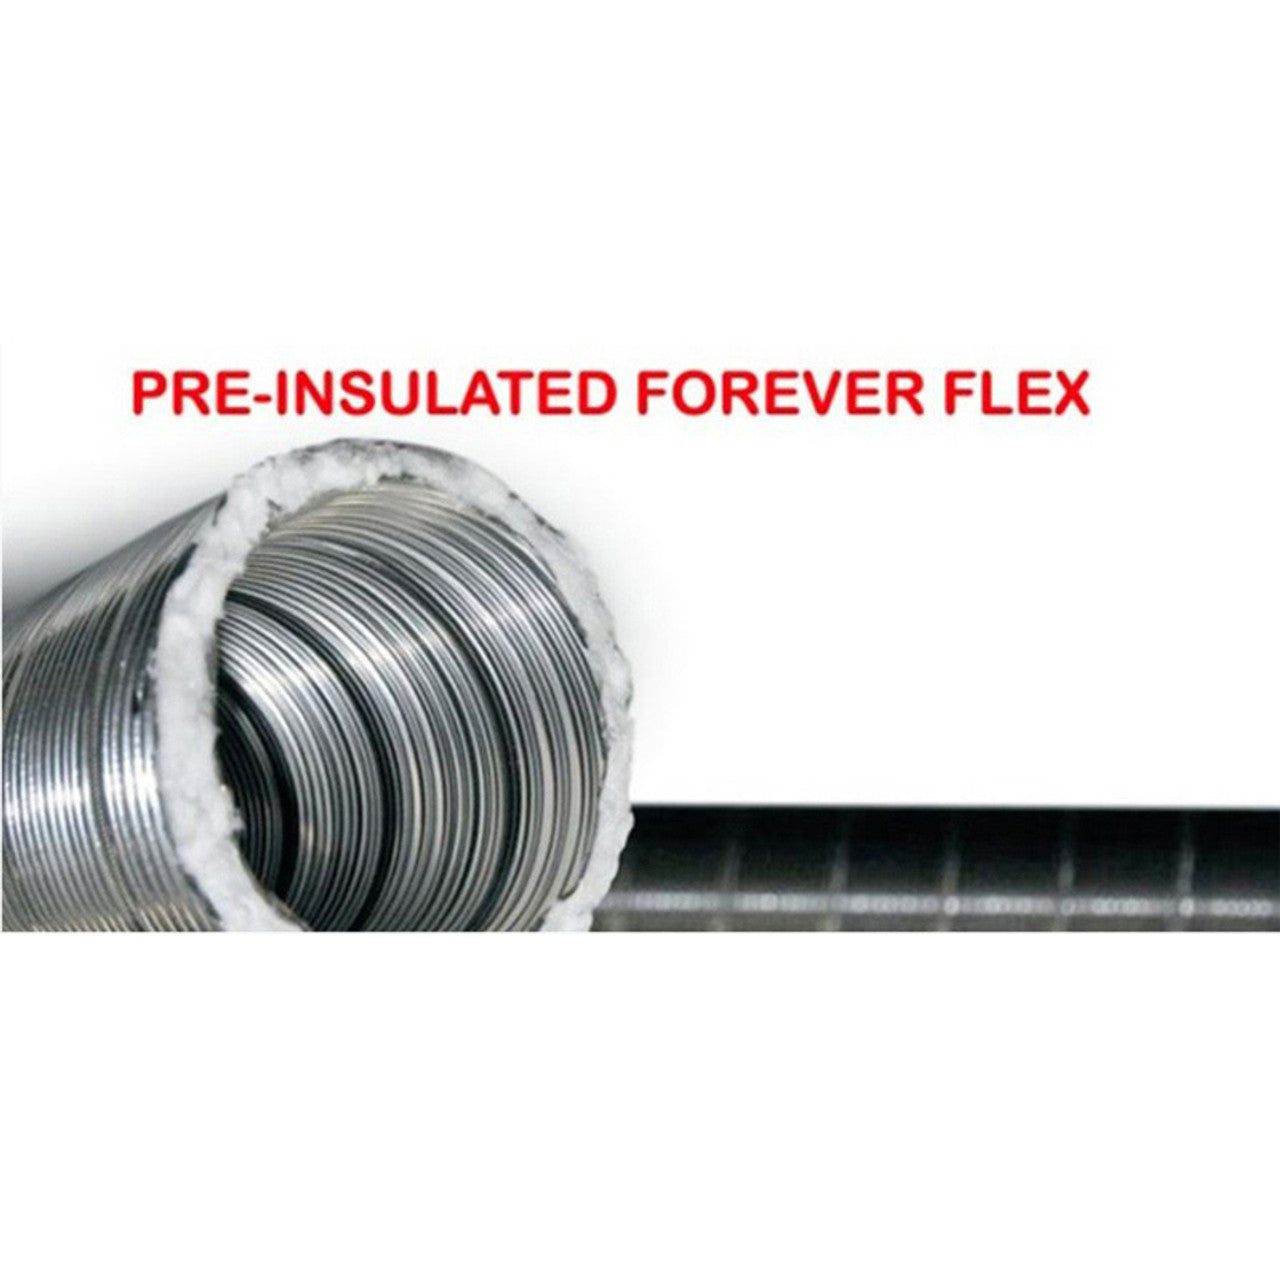 (DS) - 7" Premium Pre-Insulated Forever Flex 316Ti-Alloy .005 Stainless Cut-to-Length Liner - L5S7PI - Chimney Cricket